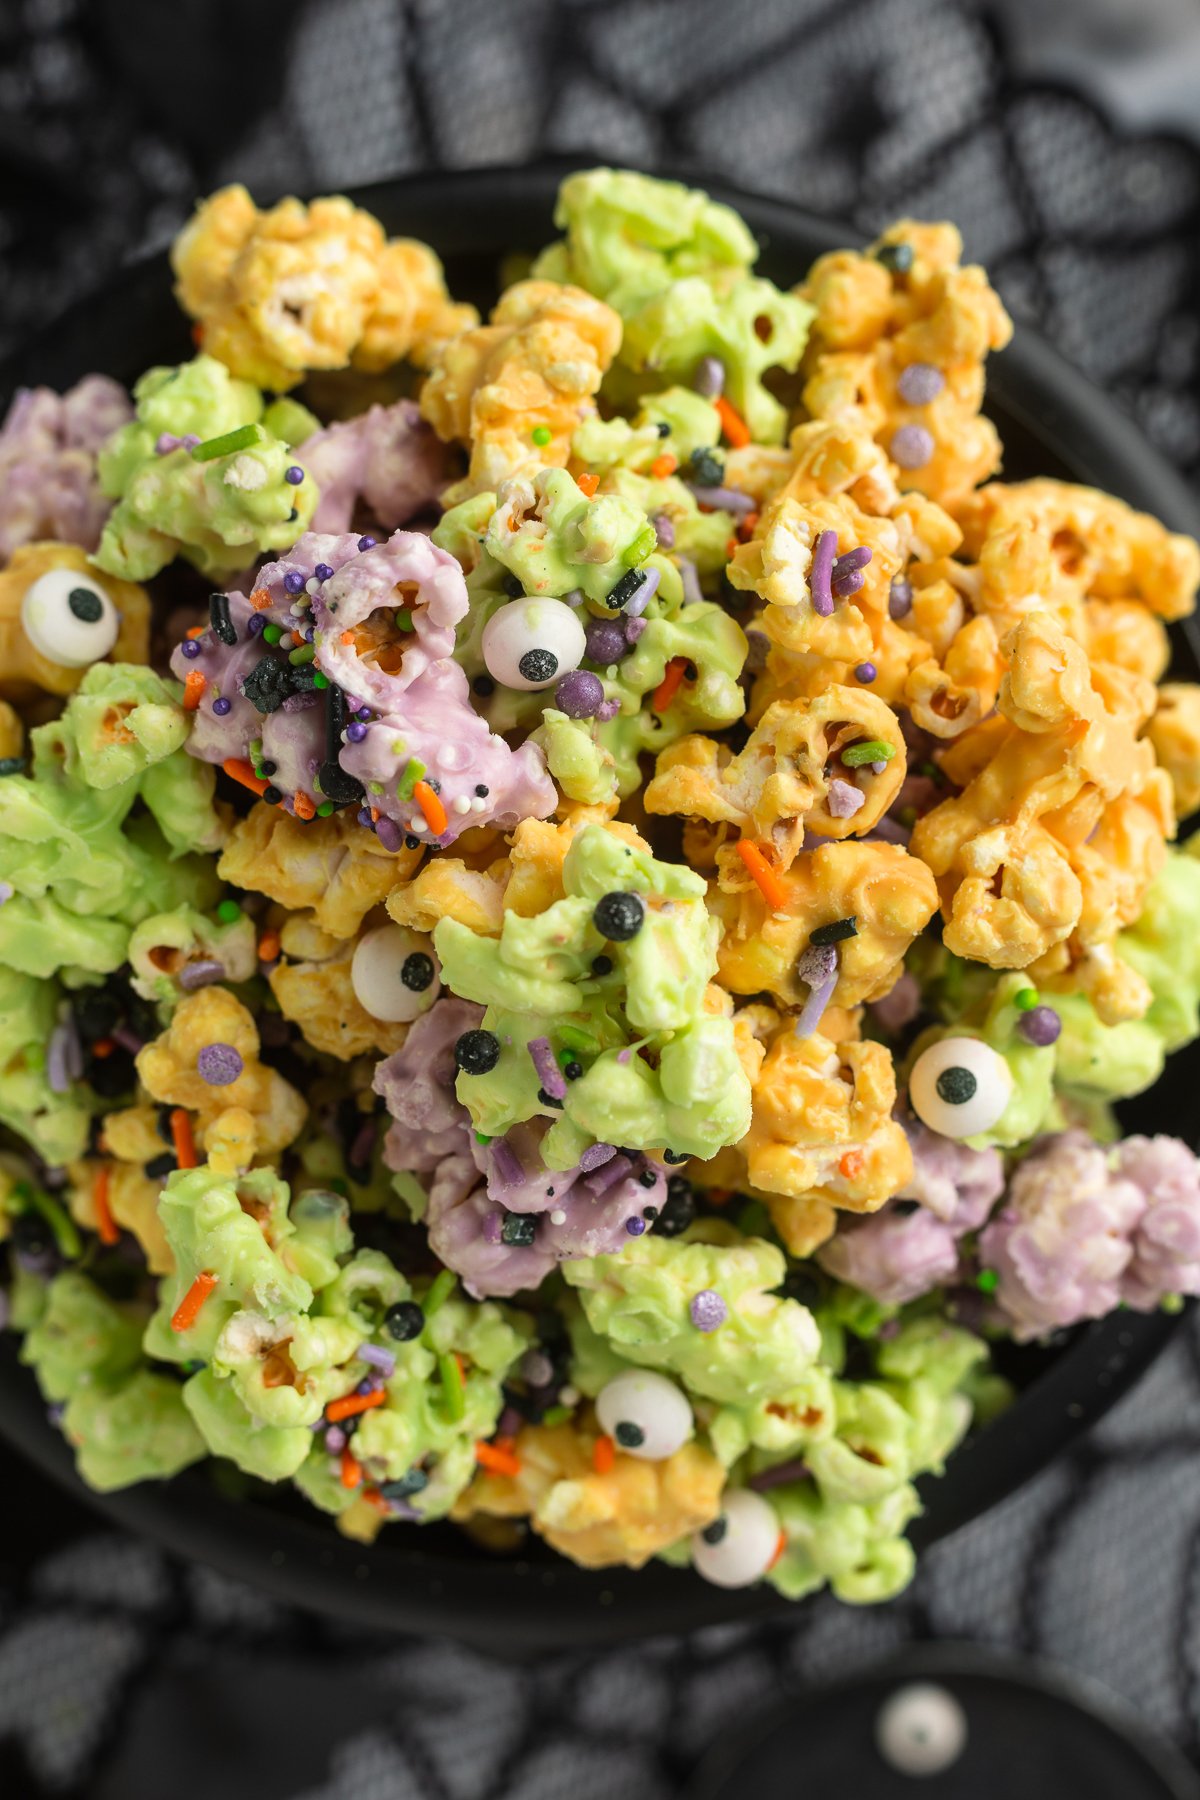 Close-up, overhead view of a plastic cauldron filled with orange, purple, and green white chocolate covered popcorn clusters with sprinkles and candy eyes.